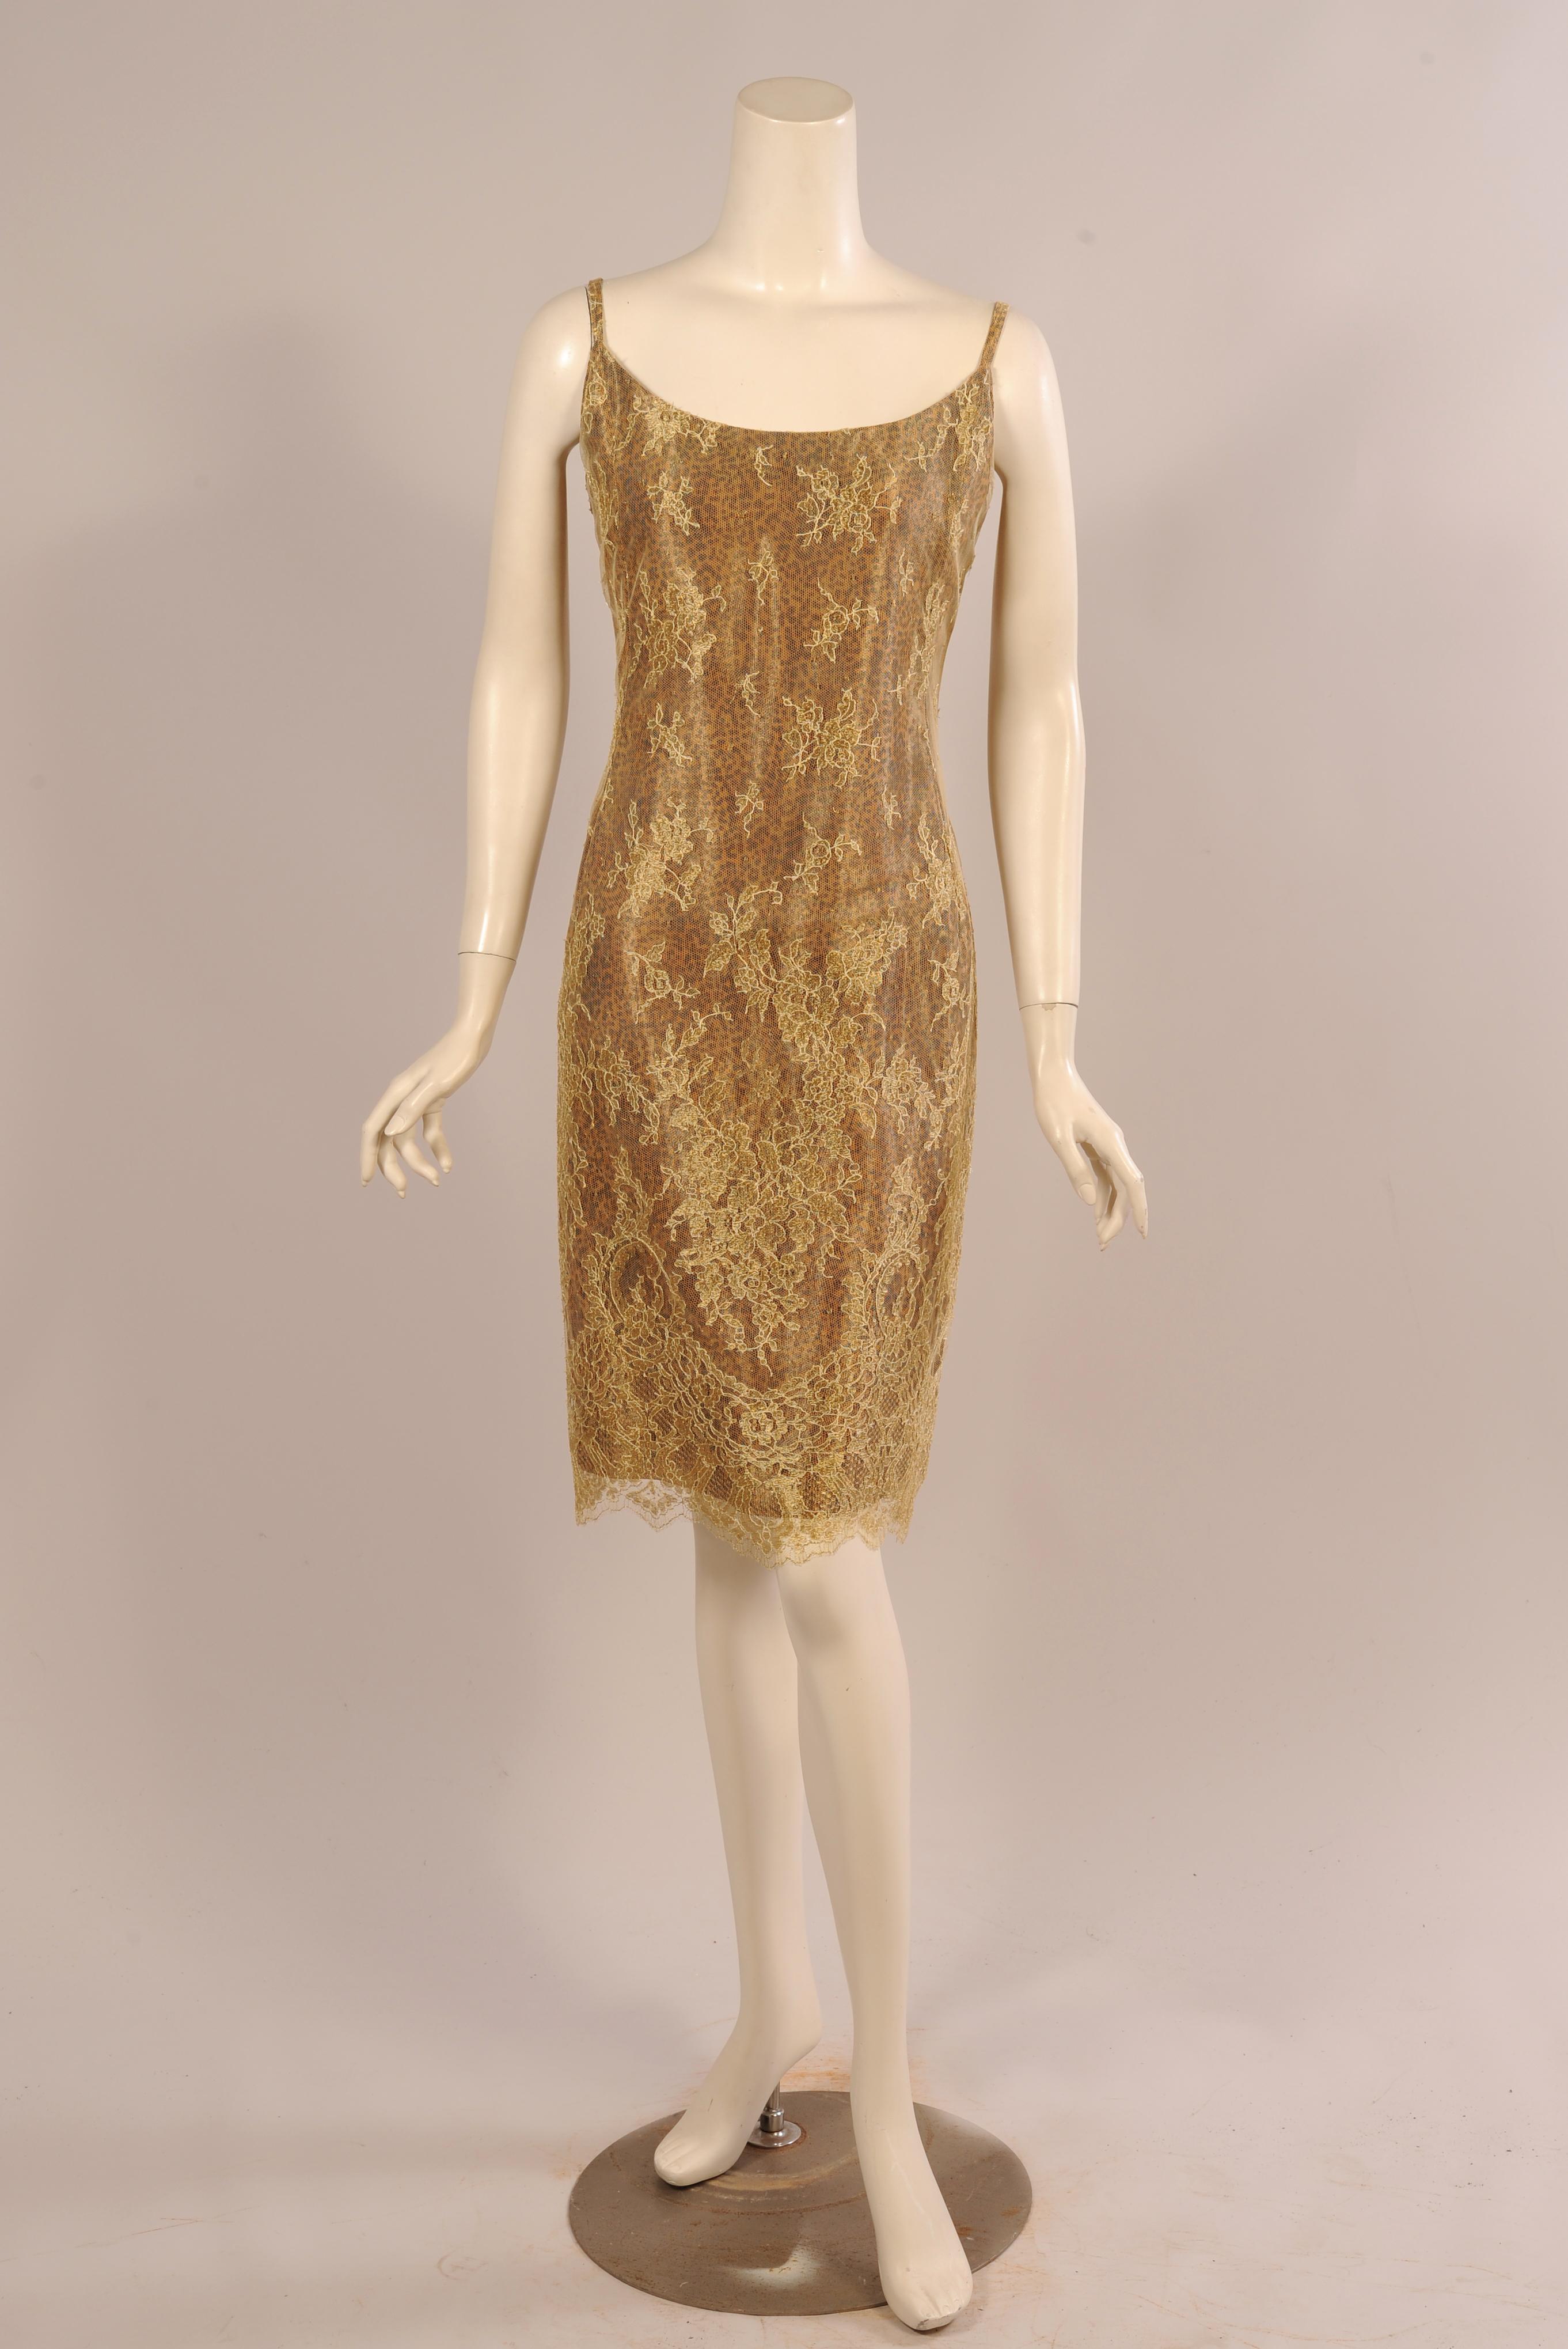 Lustrous gold lace is layered over a leopard print with a gold sheen for a subtle and unusual animal print dress. There are narrow straps, a center back invisible zipper and a scalloped hemline following the pattern of the lace.  The dress is lined